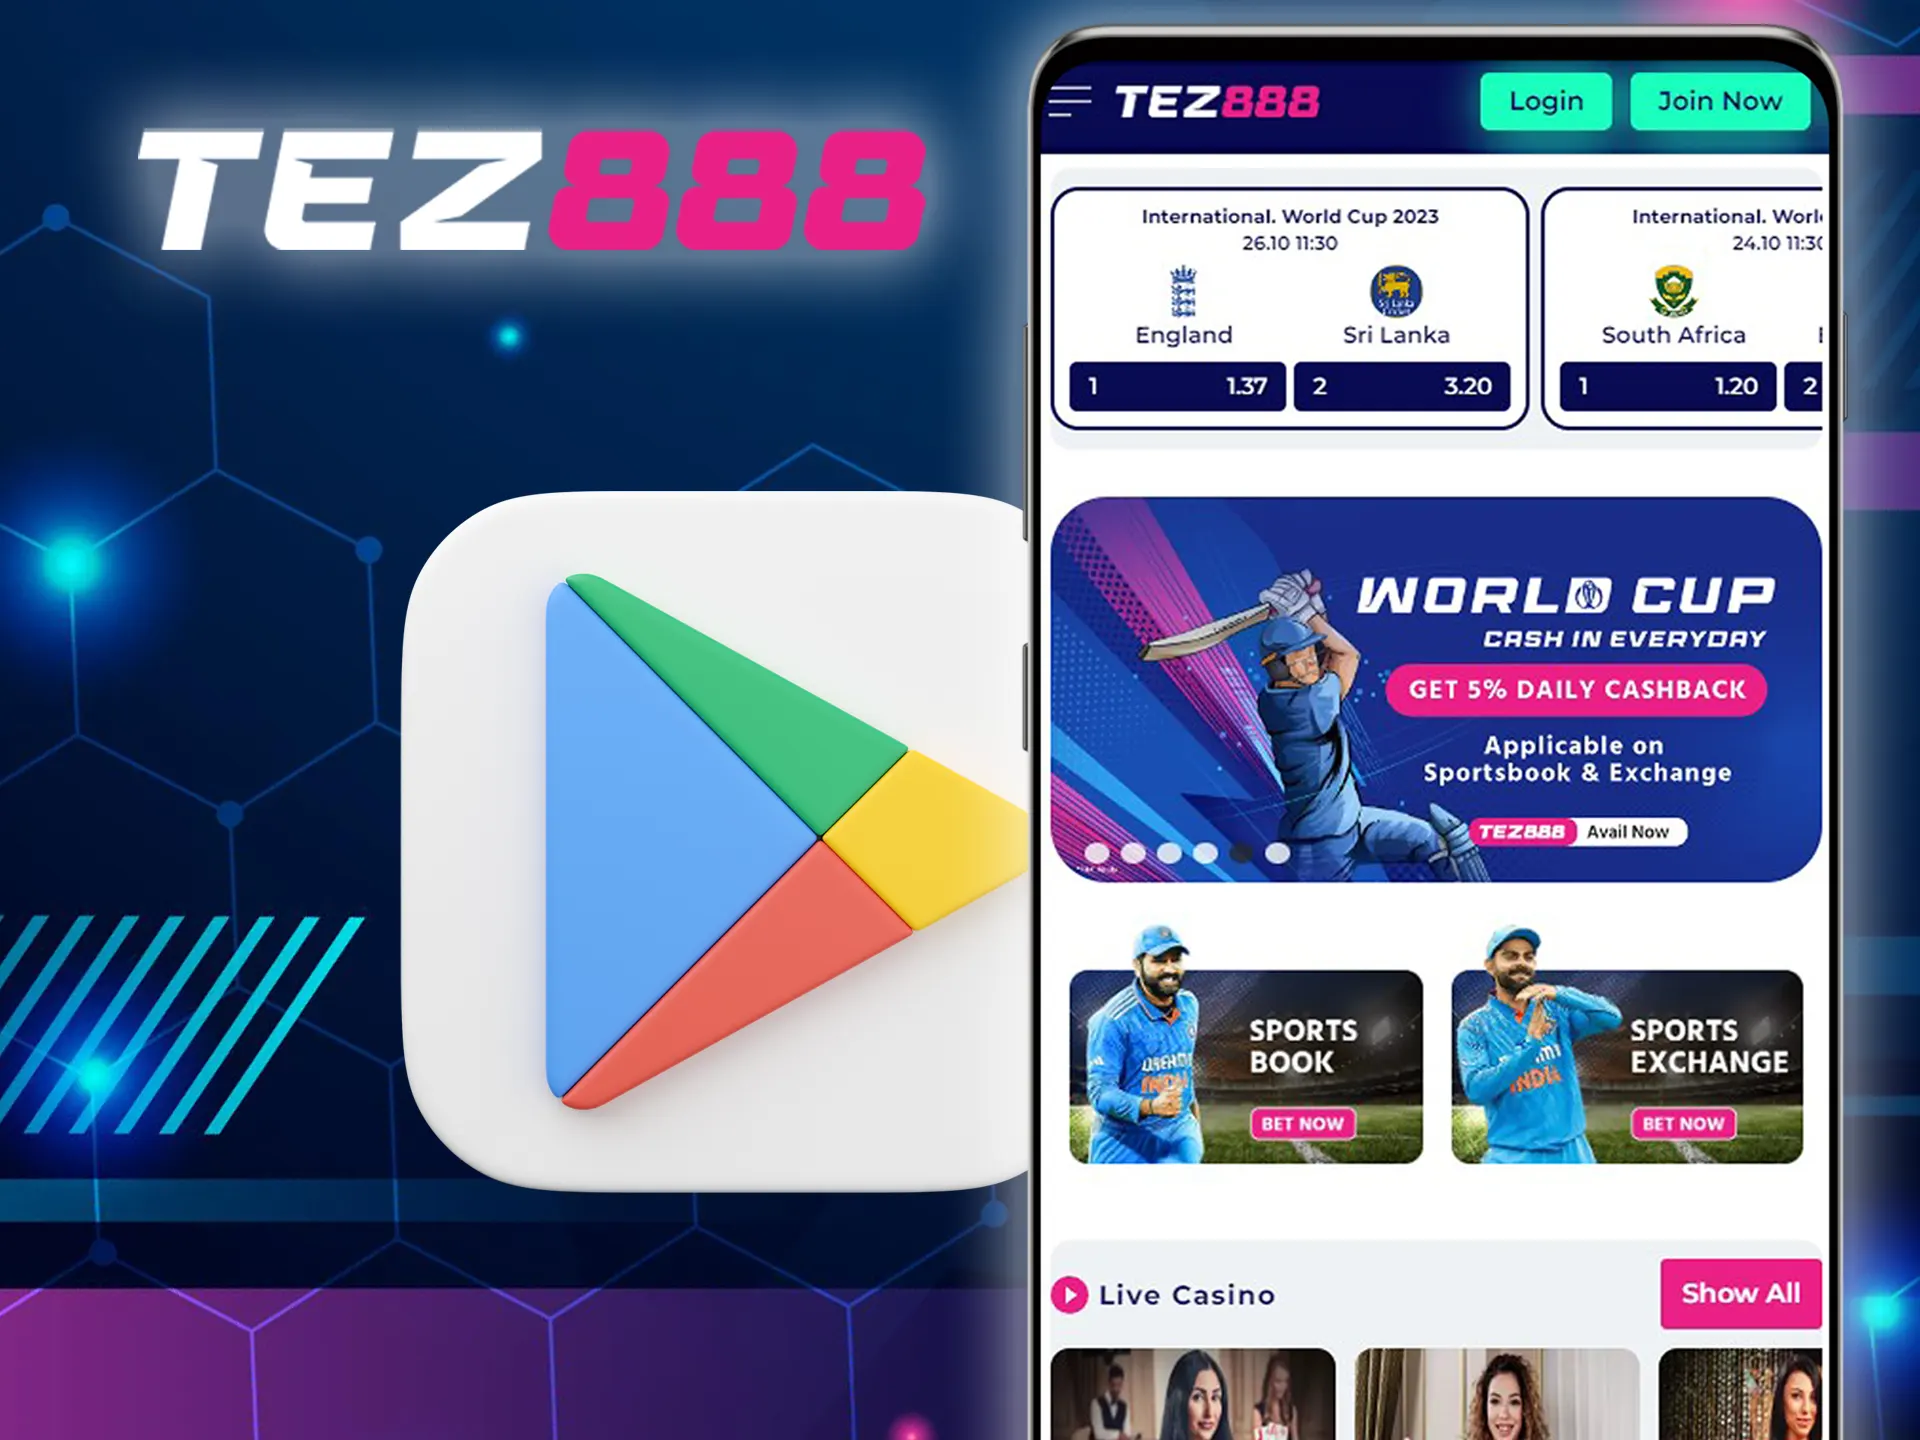 Install the tez888 app on your Android device.